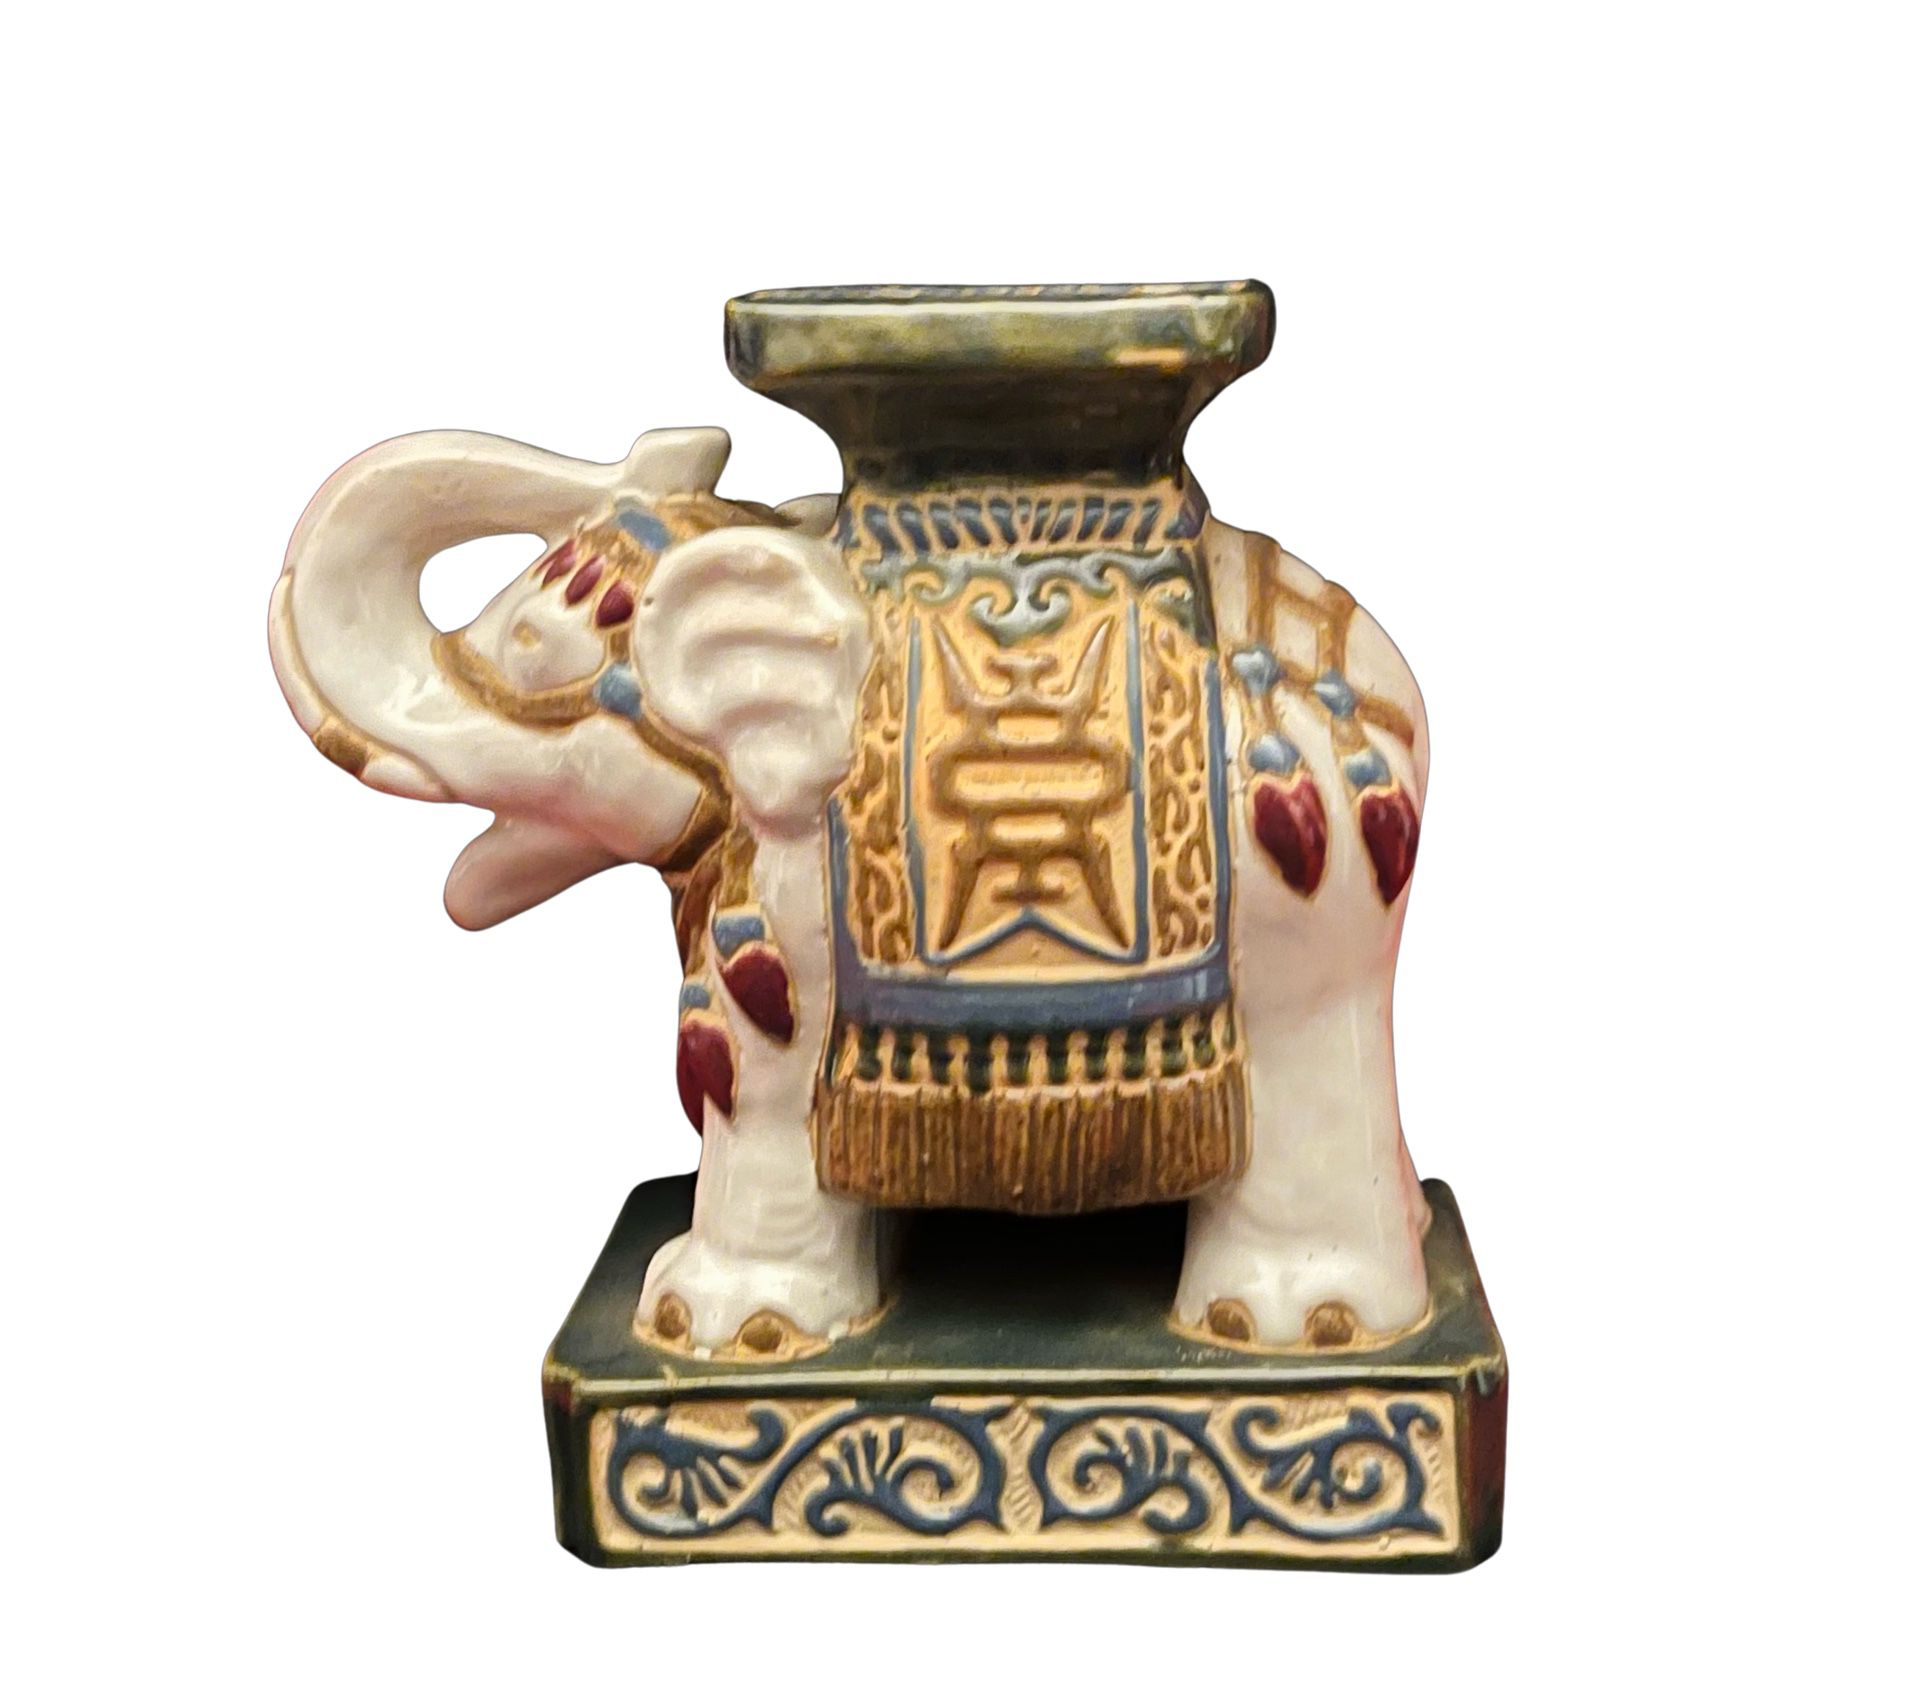 💕 Vintage NEW Small Asian Ceramic Glazed White, Green, Multicolored ELEPHANT Statue, Plant Stand, Bookend 💕